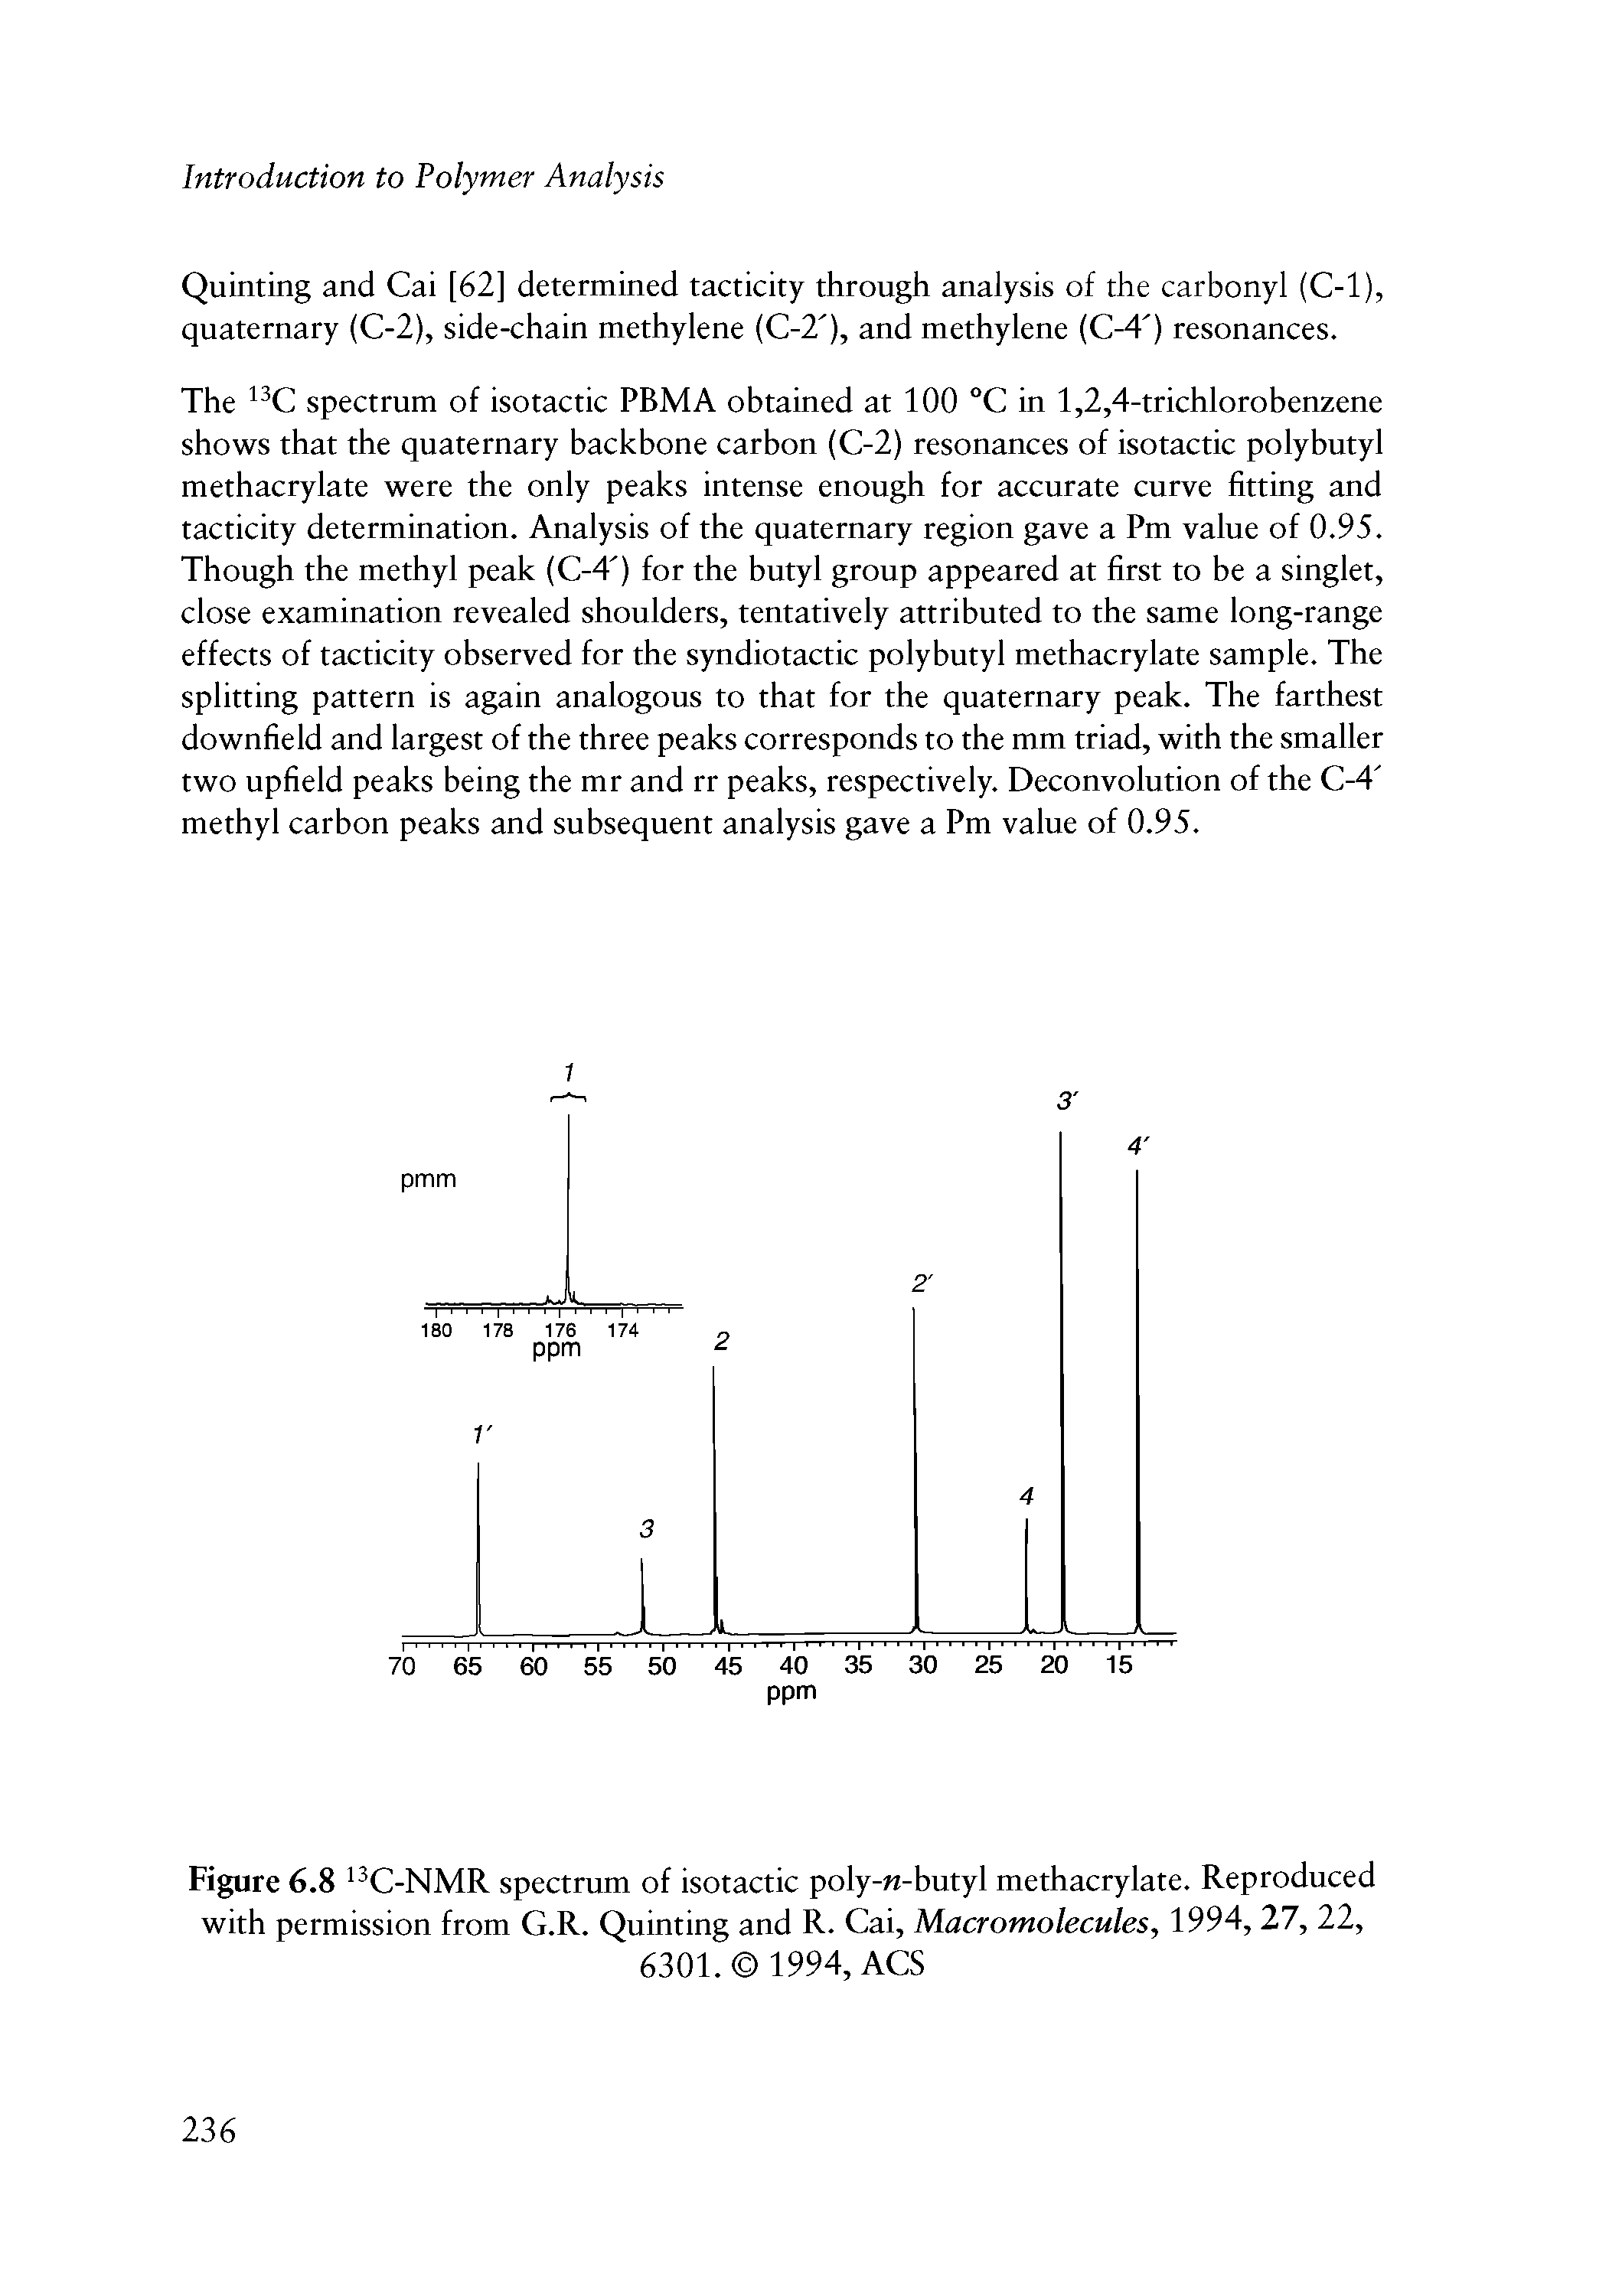 Figure 6.8 C-NMR spectrum of isotactic poly-w-butyl methacrylate. Reproduced with permission from G.R. Quinting and R. Cai, Macromolecules, 1994,27, 22,...